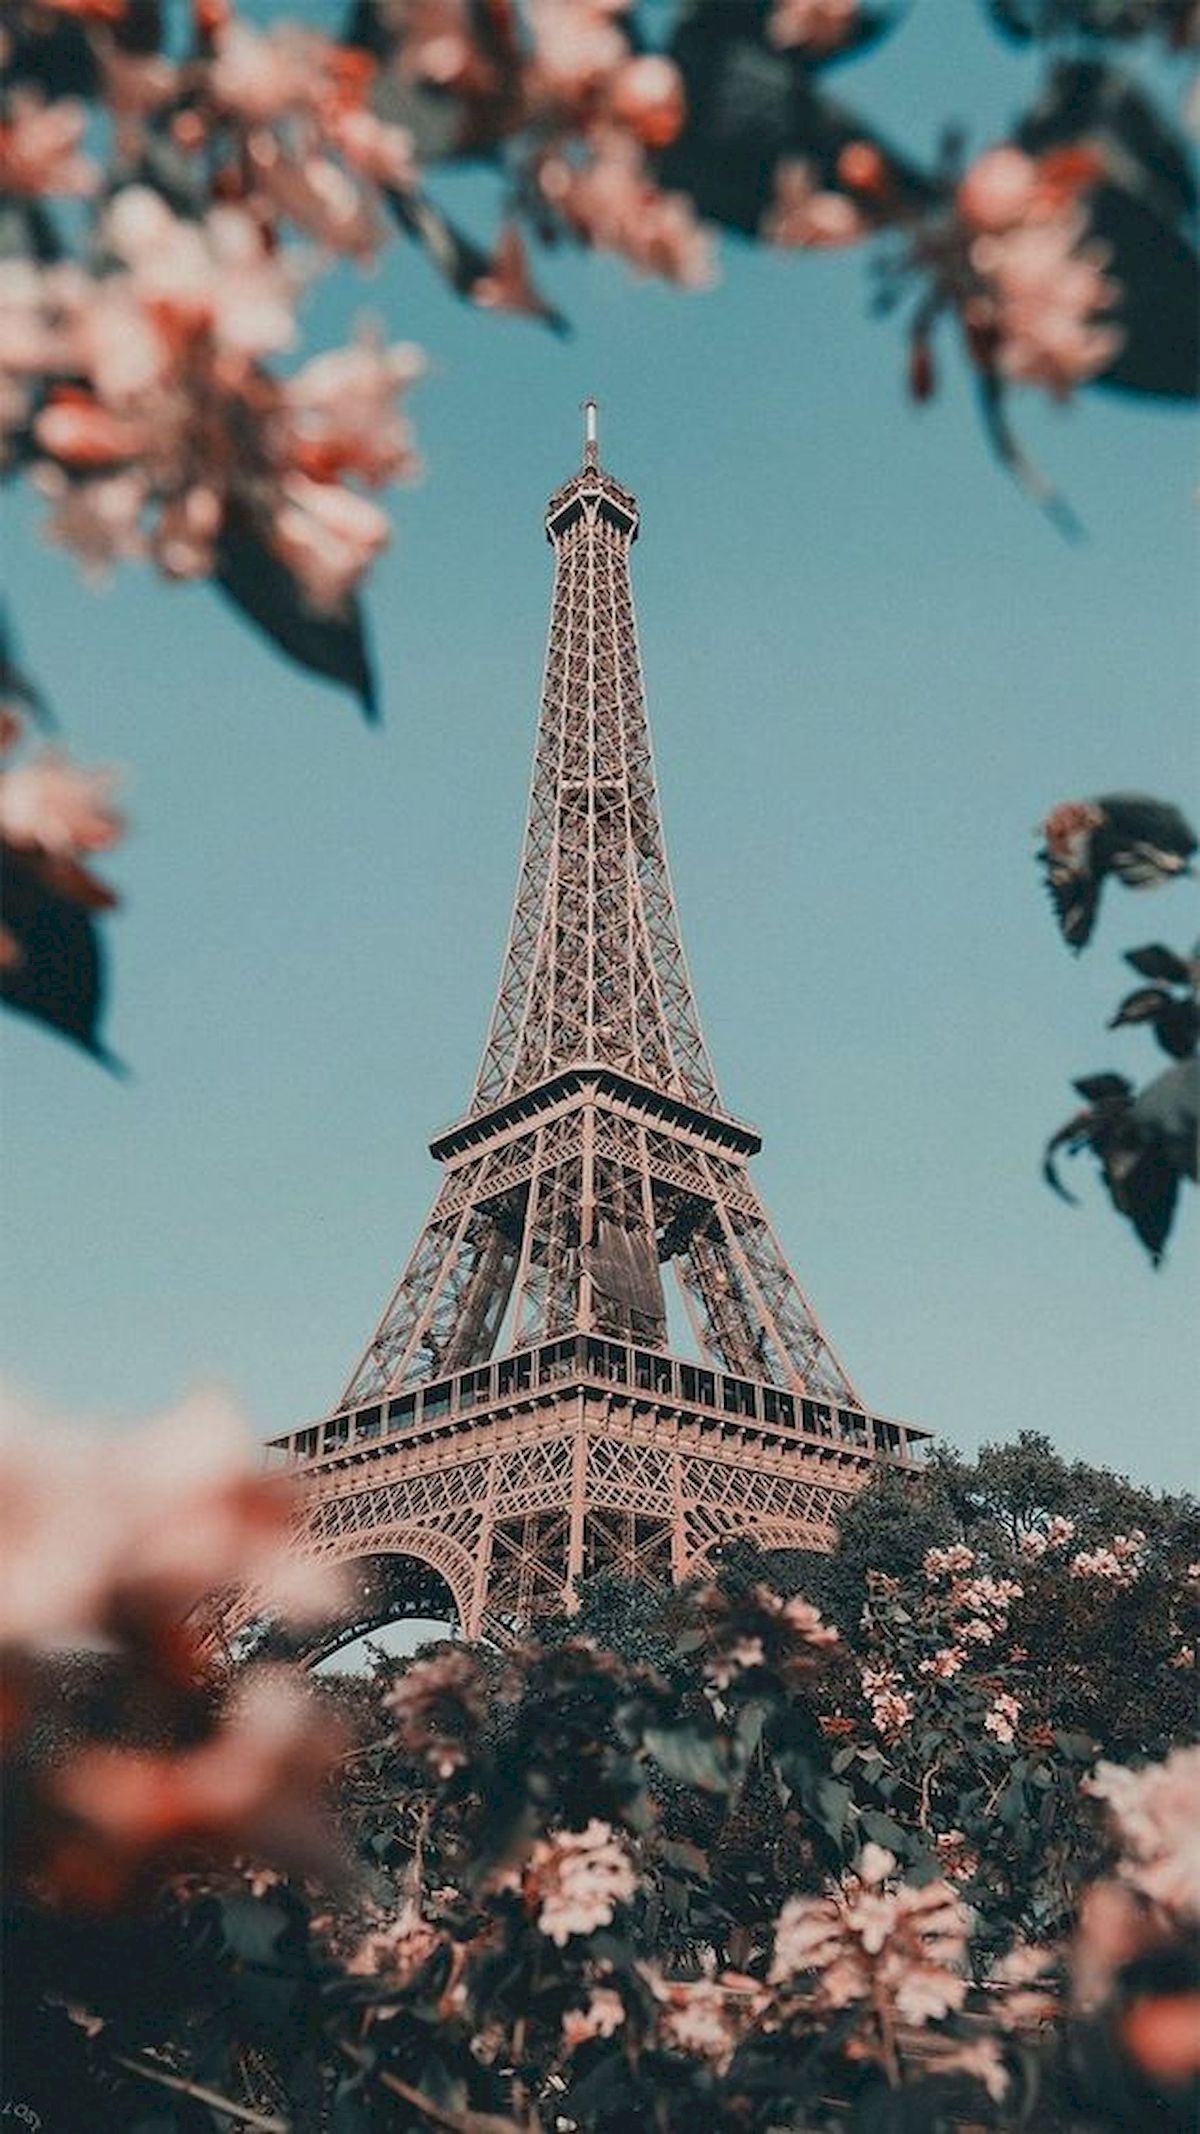 Eiffel Tower iPhone Wallpaper with high-resolution 1080x1920 pixel. You can use this wallpaper for your iPhone 5, 6, 7, 8, X, XS, XR backgrounds, Mobile Screensaver, or iPad Lock Screen - Paris, Eiffel Tower